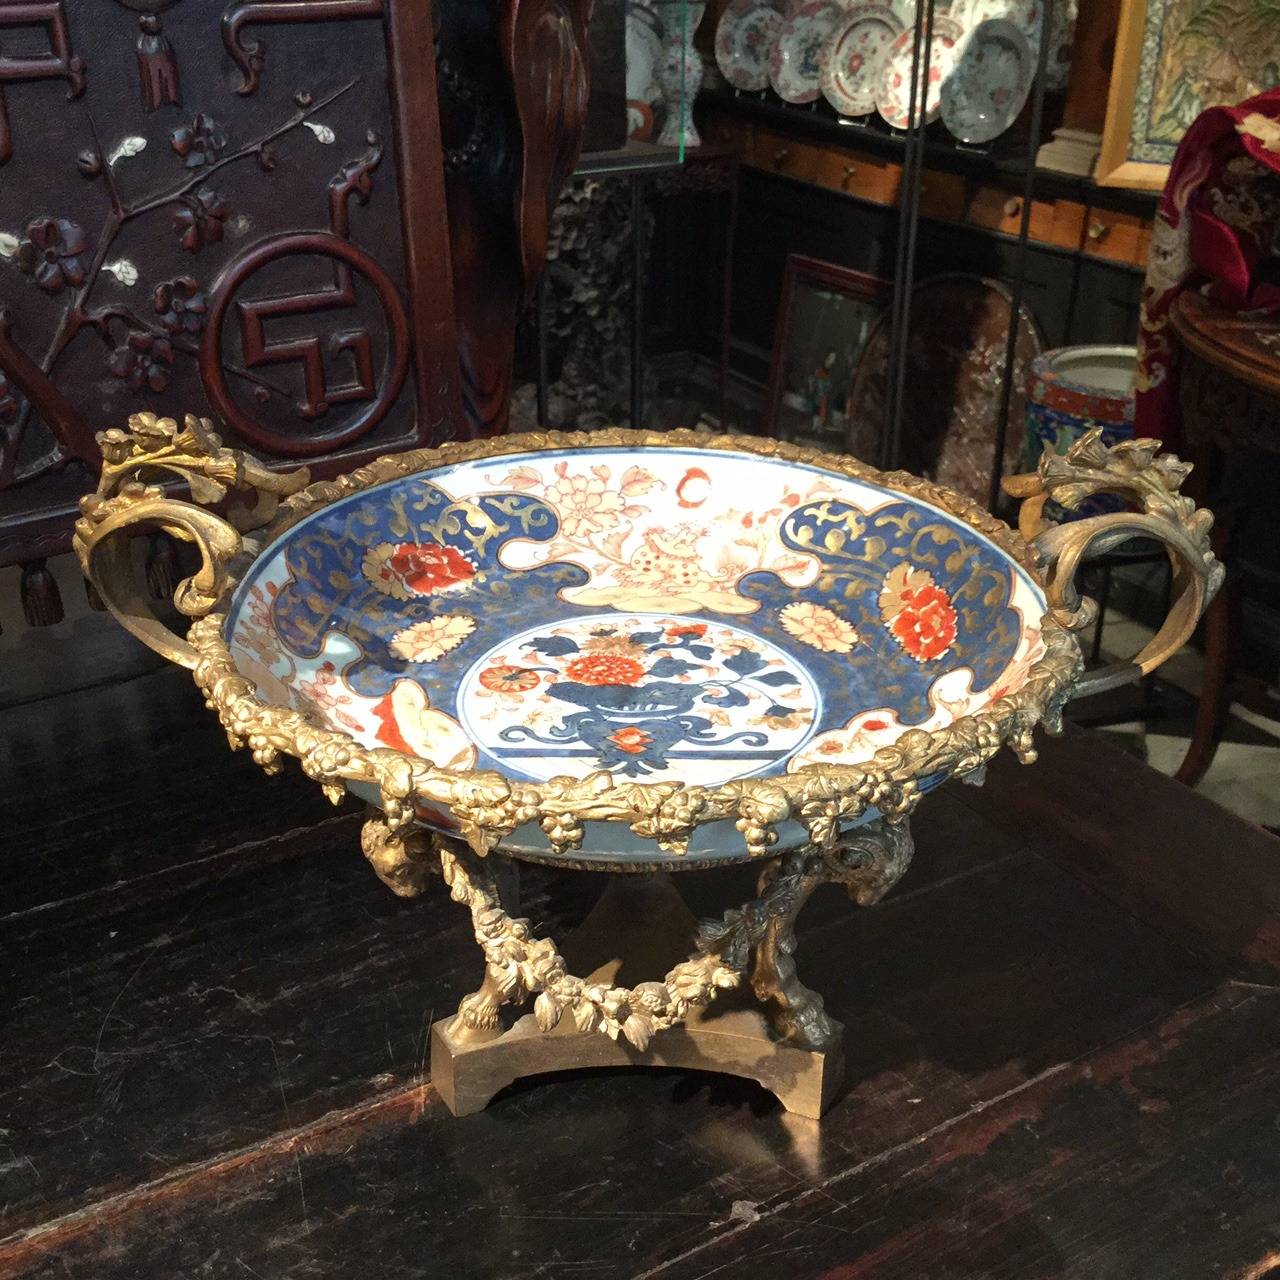 This Chinese porcelain bowl decorated in the Imari pattern in undercover blue, iron red and gold is from the 18th century.
The French bronze mount is from the 19th century.
Very nice quality centerpiece.
Measures: 32 x 24.5 cm 20.5 high.